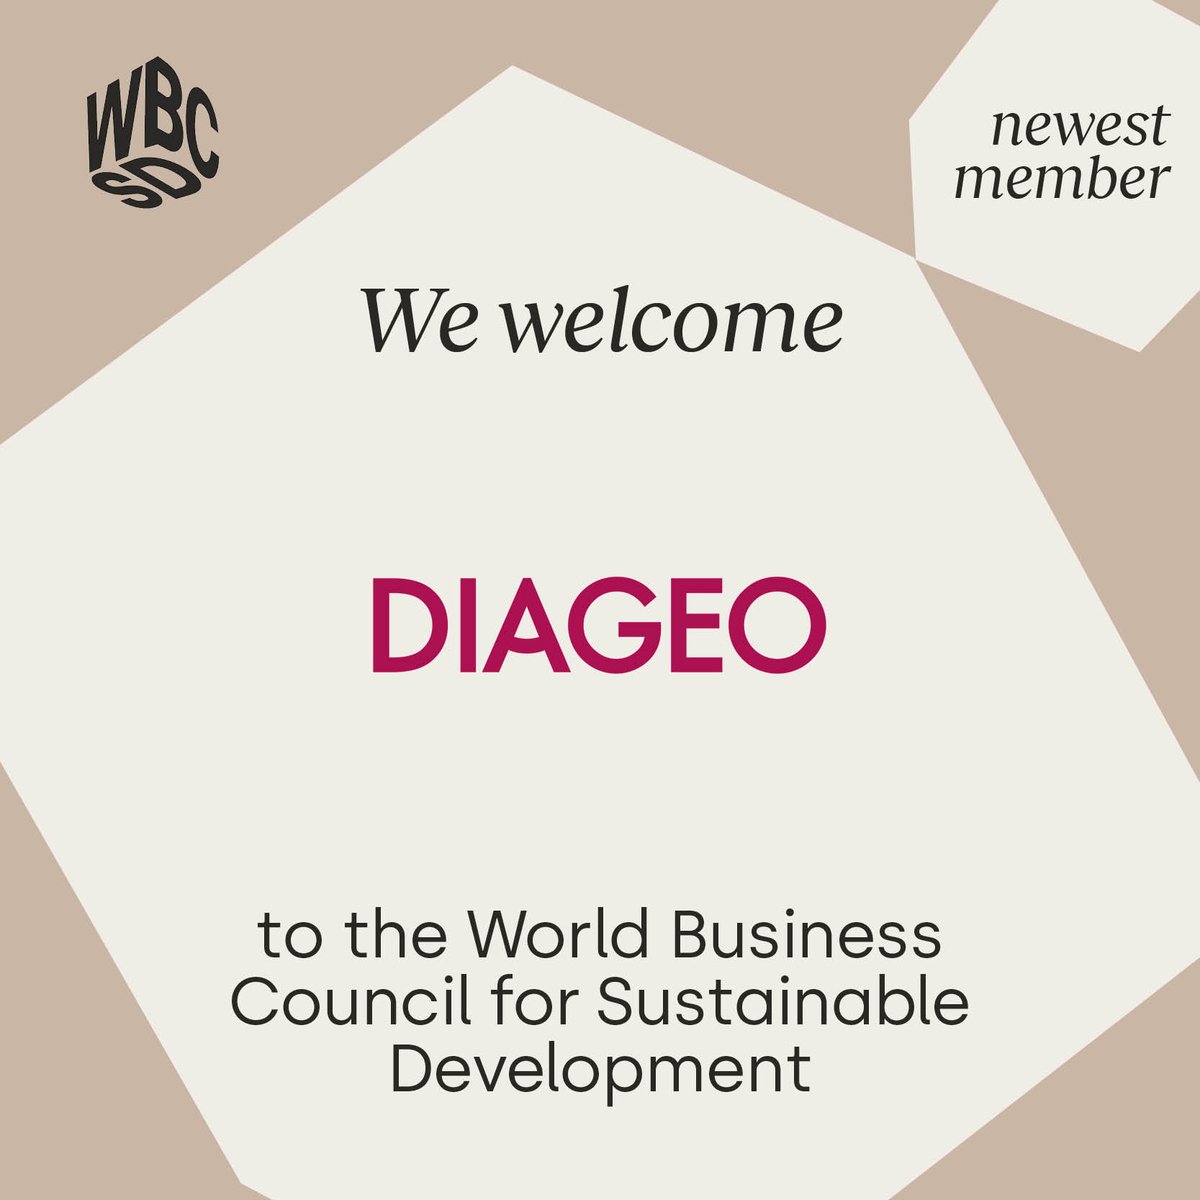 📣 We welcome @Diageo_News as the newest member of WBCSD! 🍸 A global leader in beverage alcohol, Diageo will continue its work with WBCSD to help create a more #sustainablefuture & tackle issues such as #climatechange, water stress & #biodiversity loss. 🌿